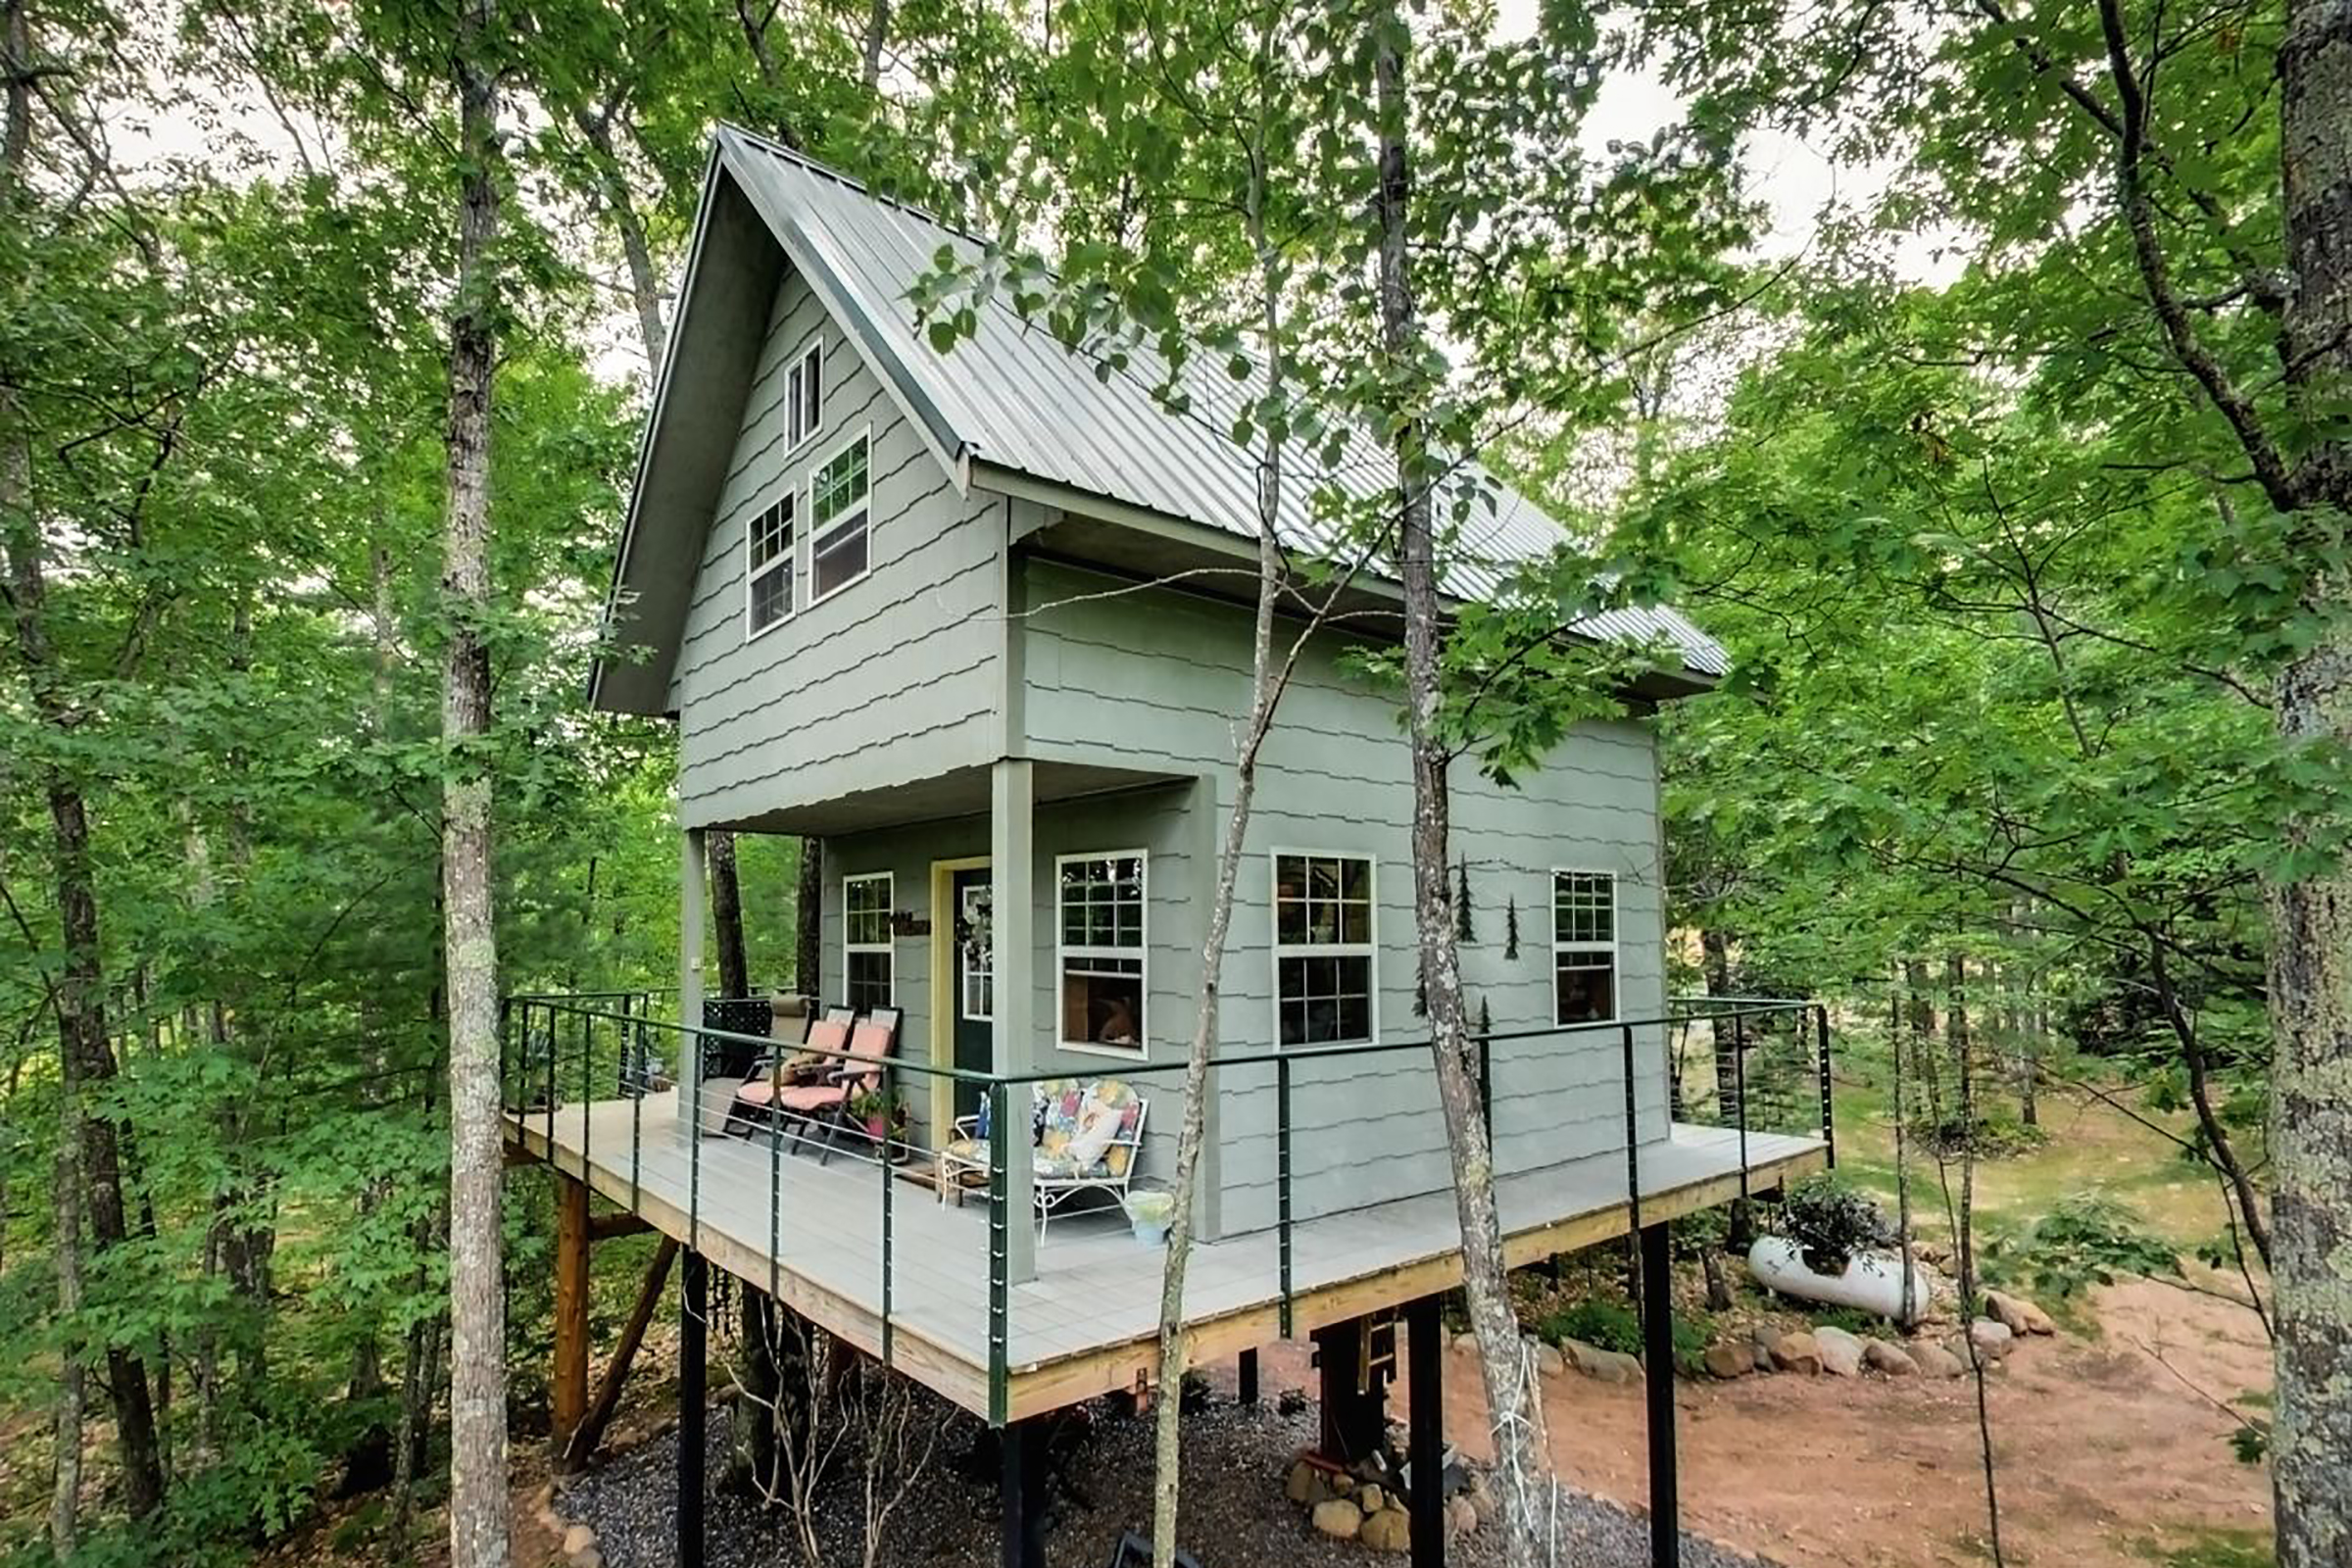 Exterior view of the Boulderridge Treehouse in Northern Wisconsin